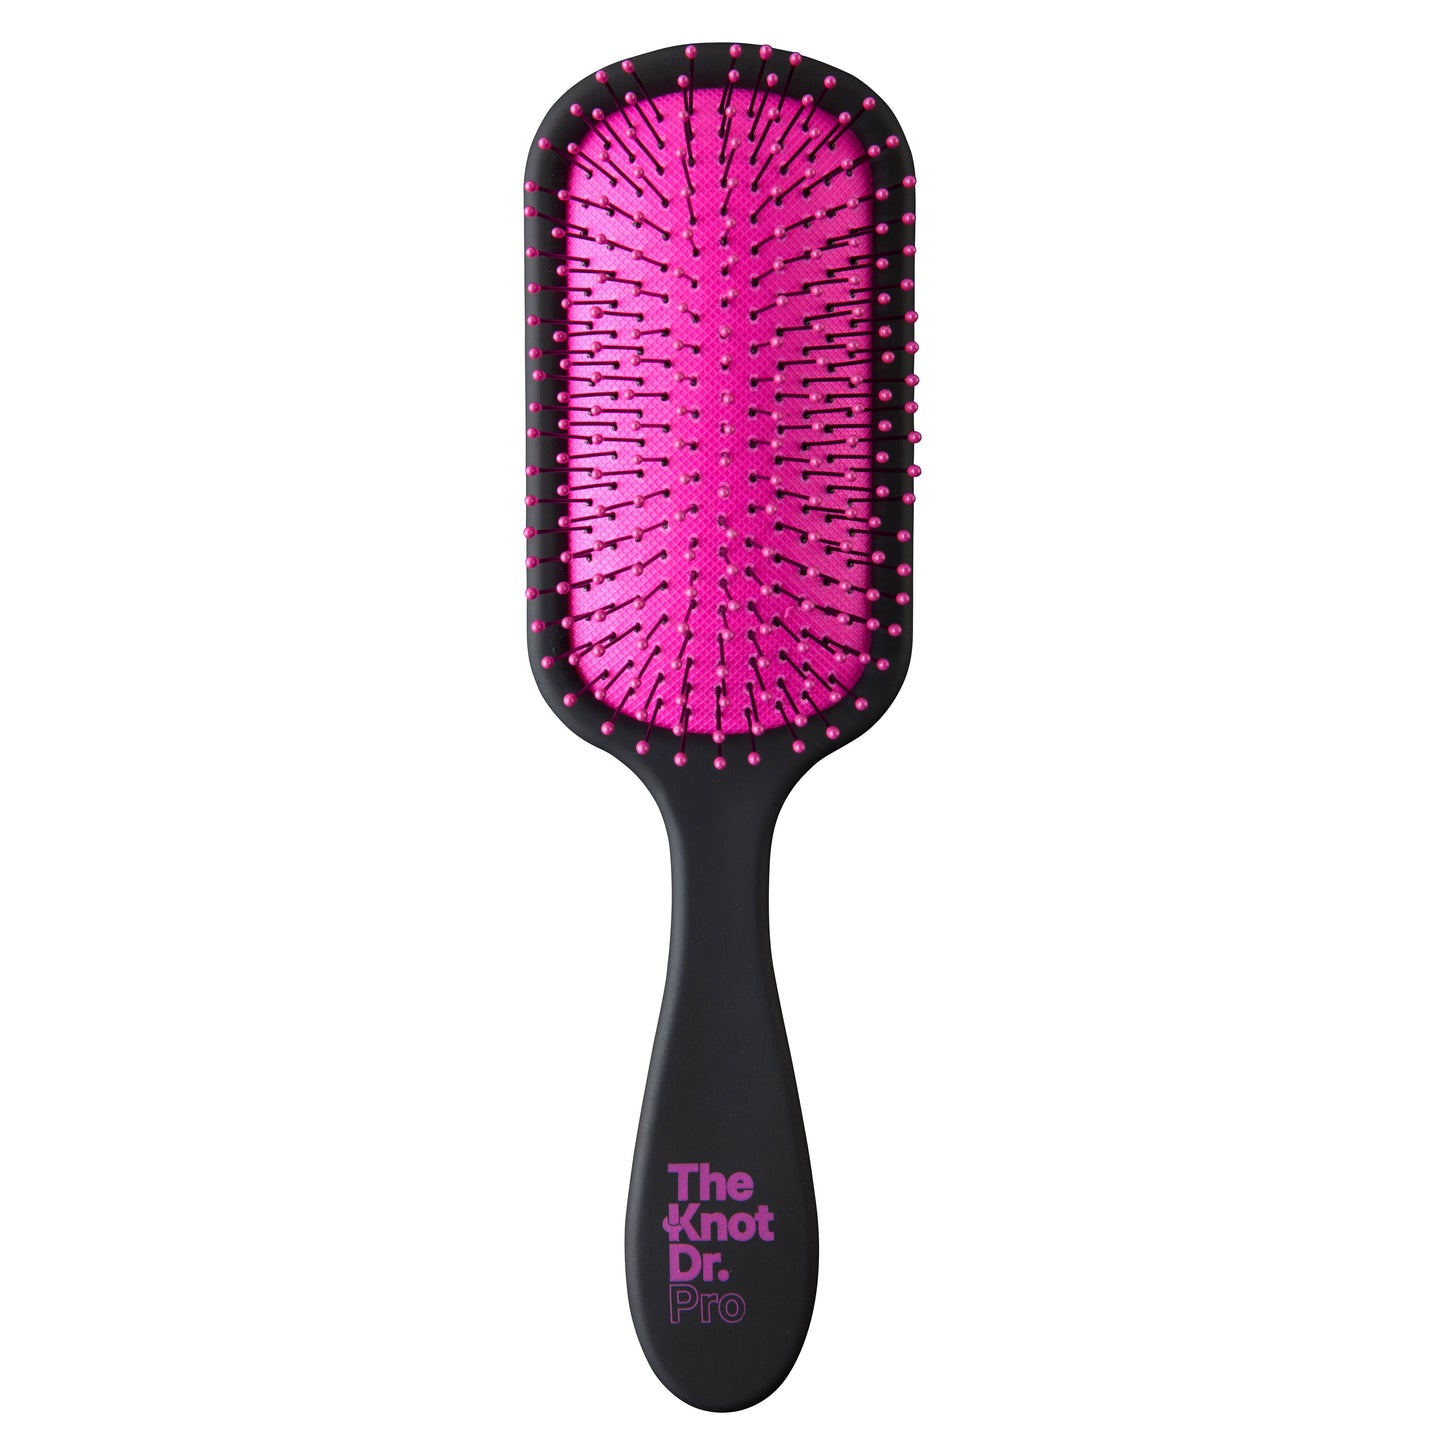 Pro detangling hairbrush in black with pink pad